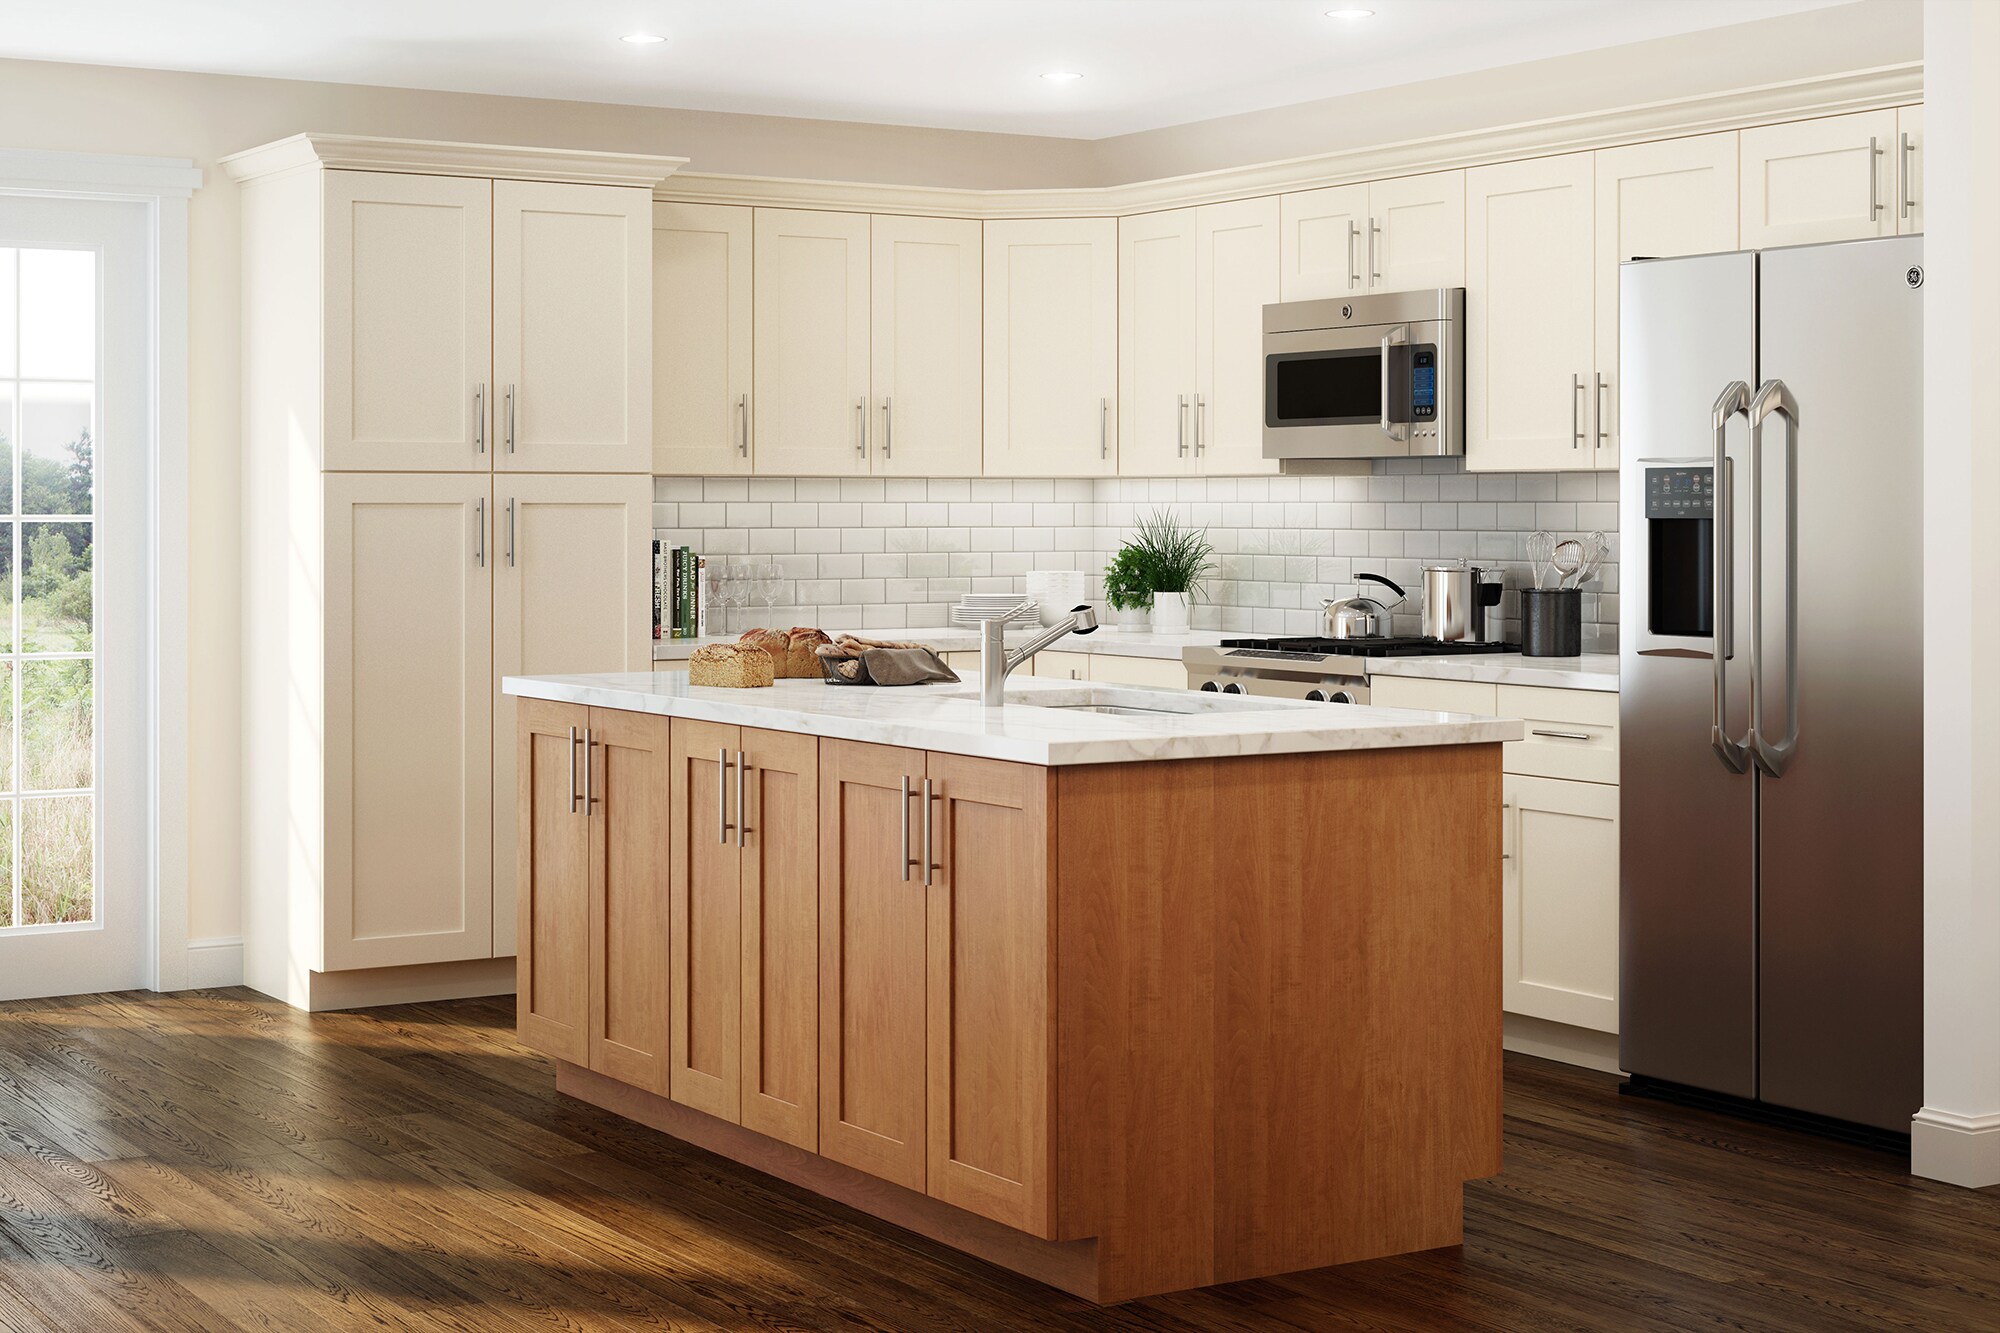 Luxxe Cabinetry Heston 13-in W x 13-in H Cider Stained Kitchen Cabinet ...